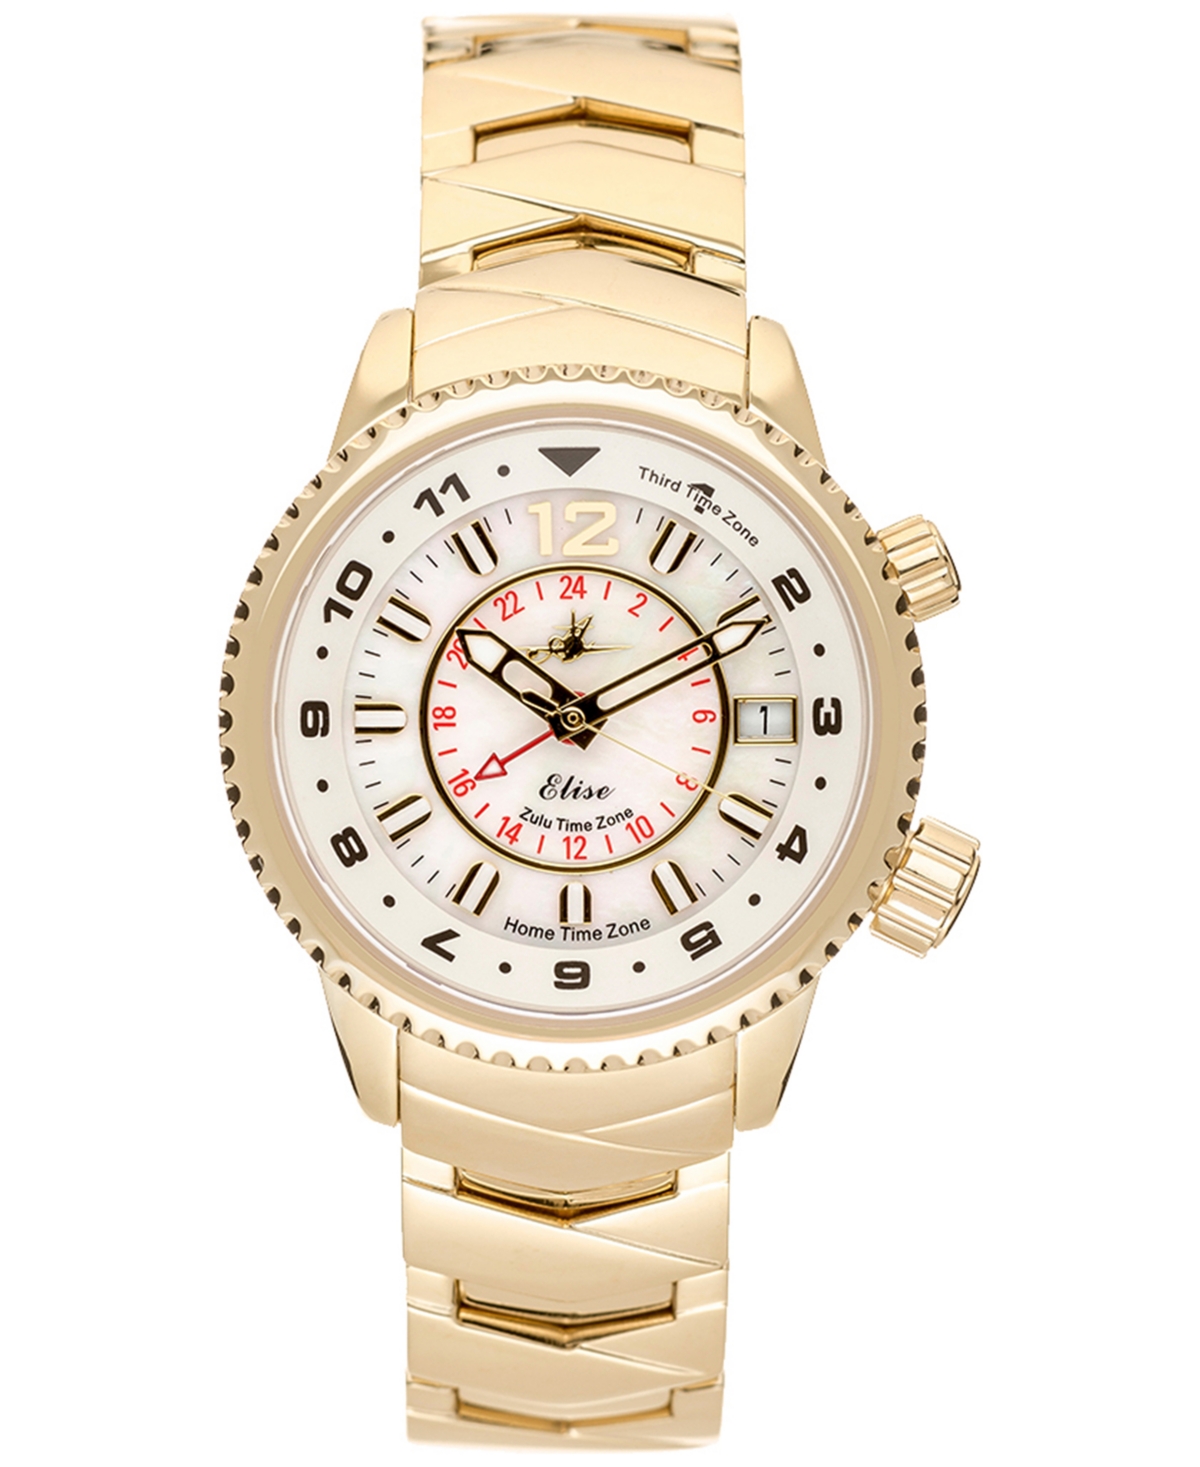 Abingdon Co. Women's Elise Swiss Tri-time 28k Gold Ion-plated Stainless Steel Bracelet Watch 33mm In Egyptian Gold